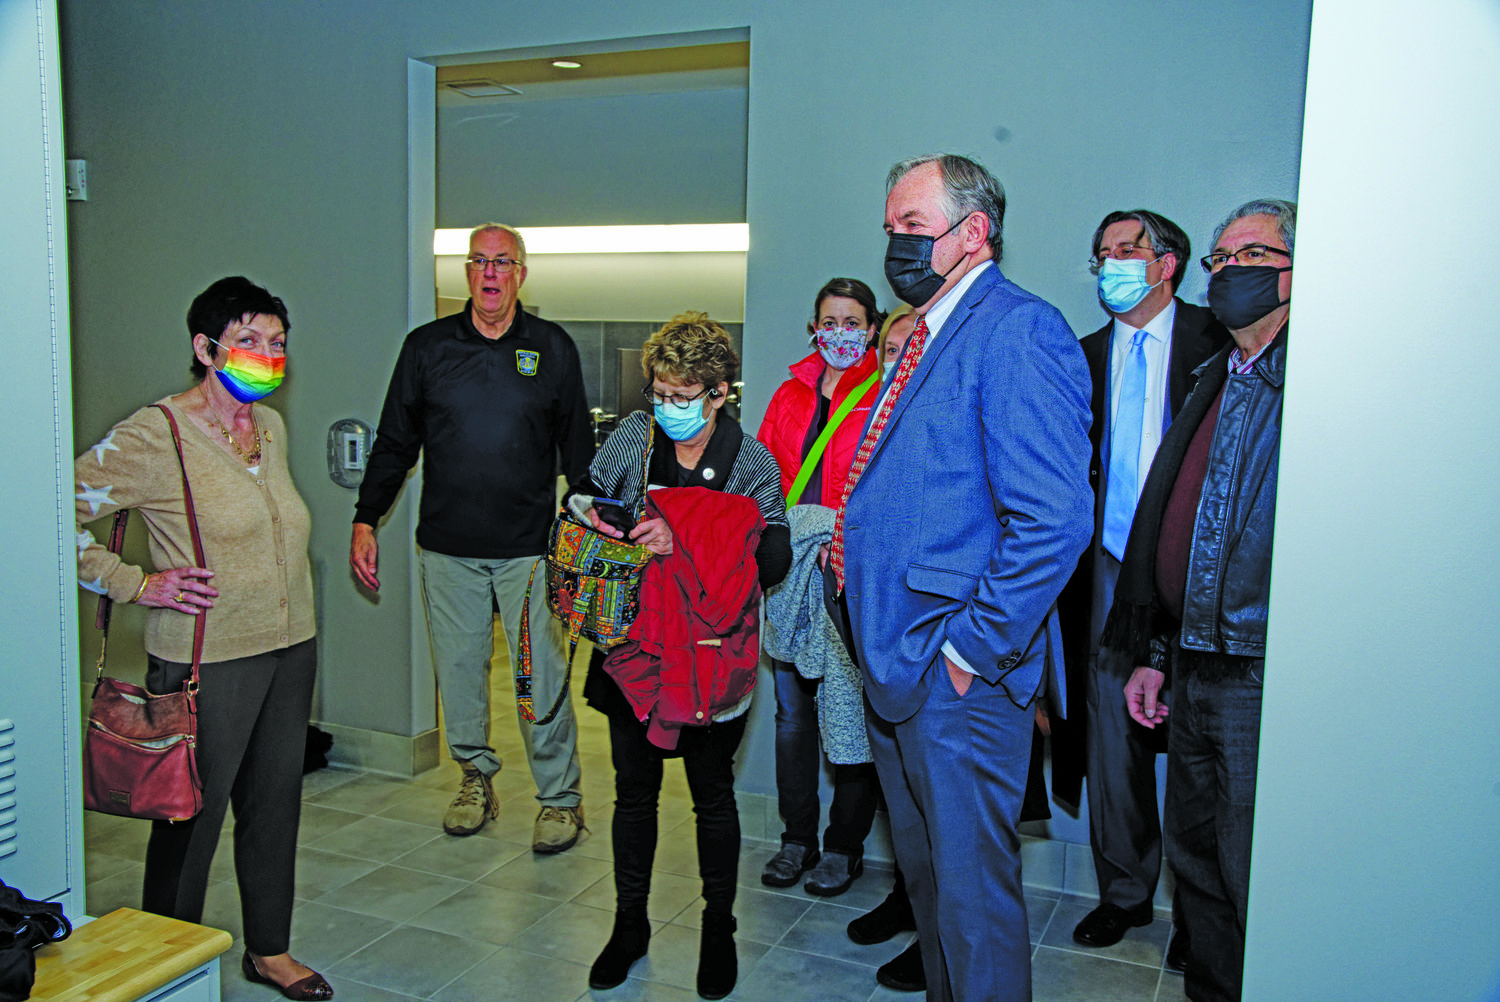 Guests tour the new building. Doylestown Mayor-elect Noni West, is at left, Doylestown Councilwoman Wendy Margolis is in the center.